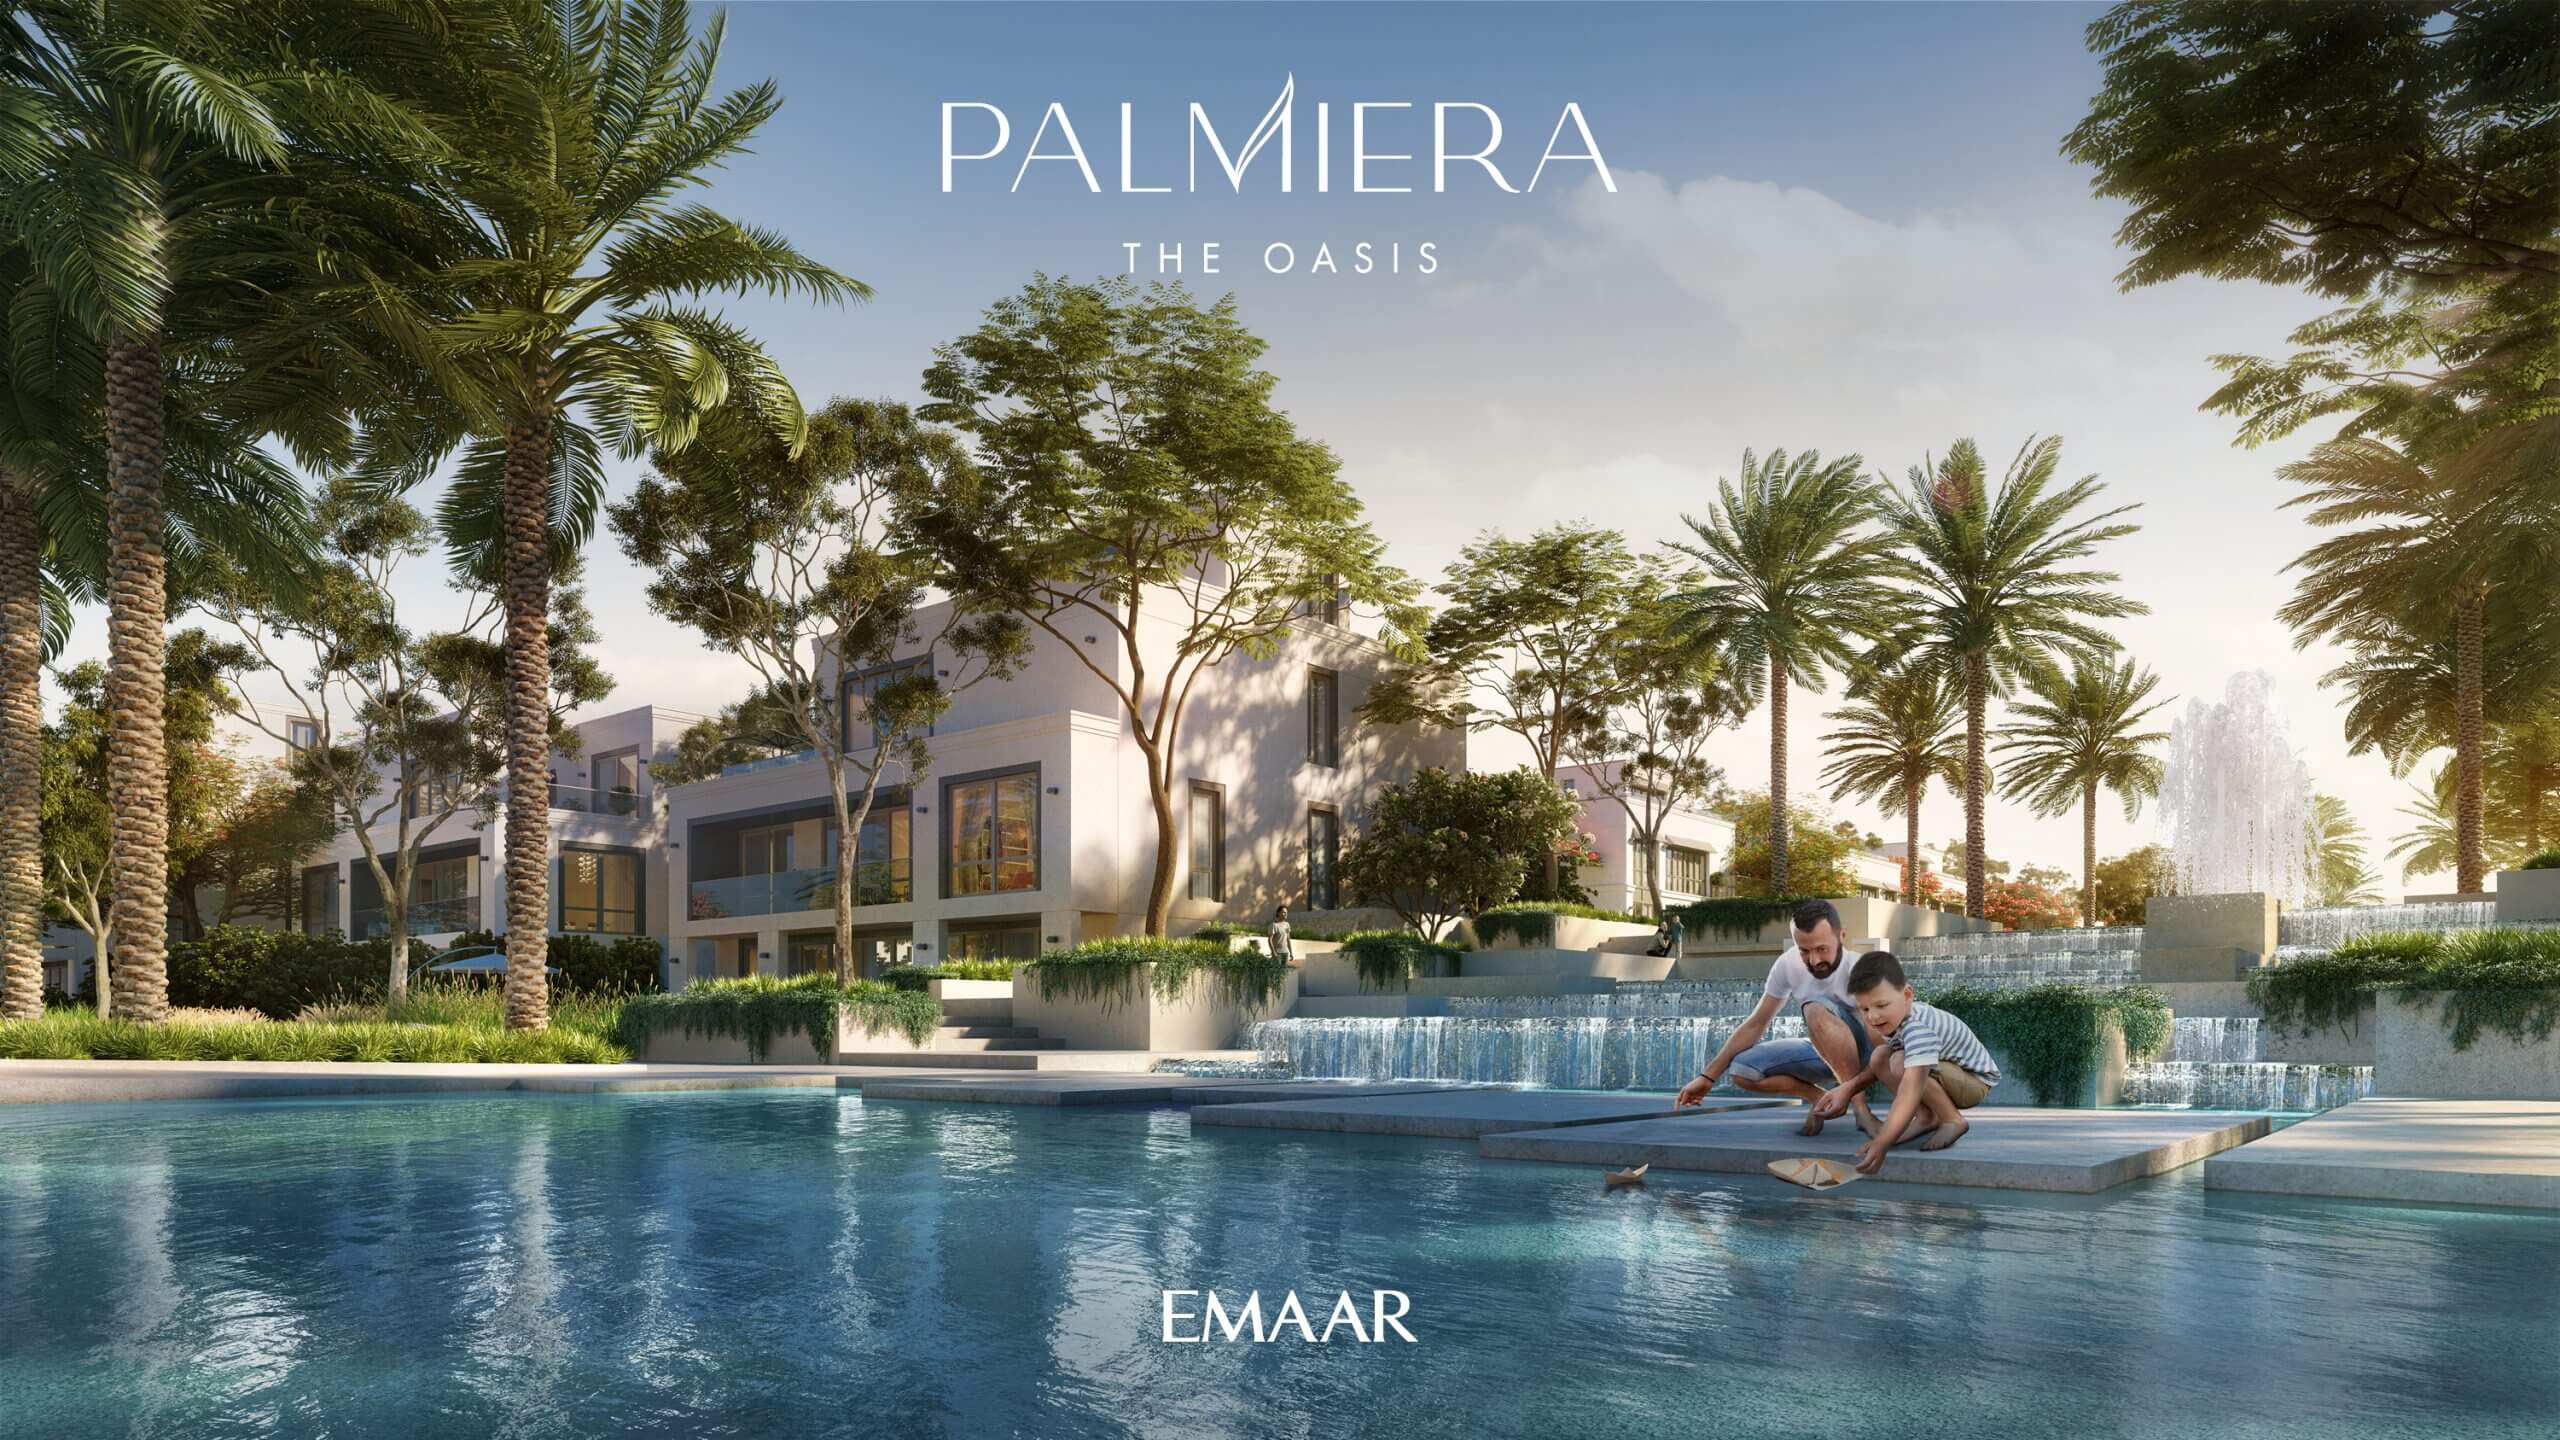 PALIEMRA_RENDERS luxury property in Dubai showcased by PJ International, Dubai's premier real estate agency. Discover the epitome of elegance and opulence in this prime Dubai residence.